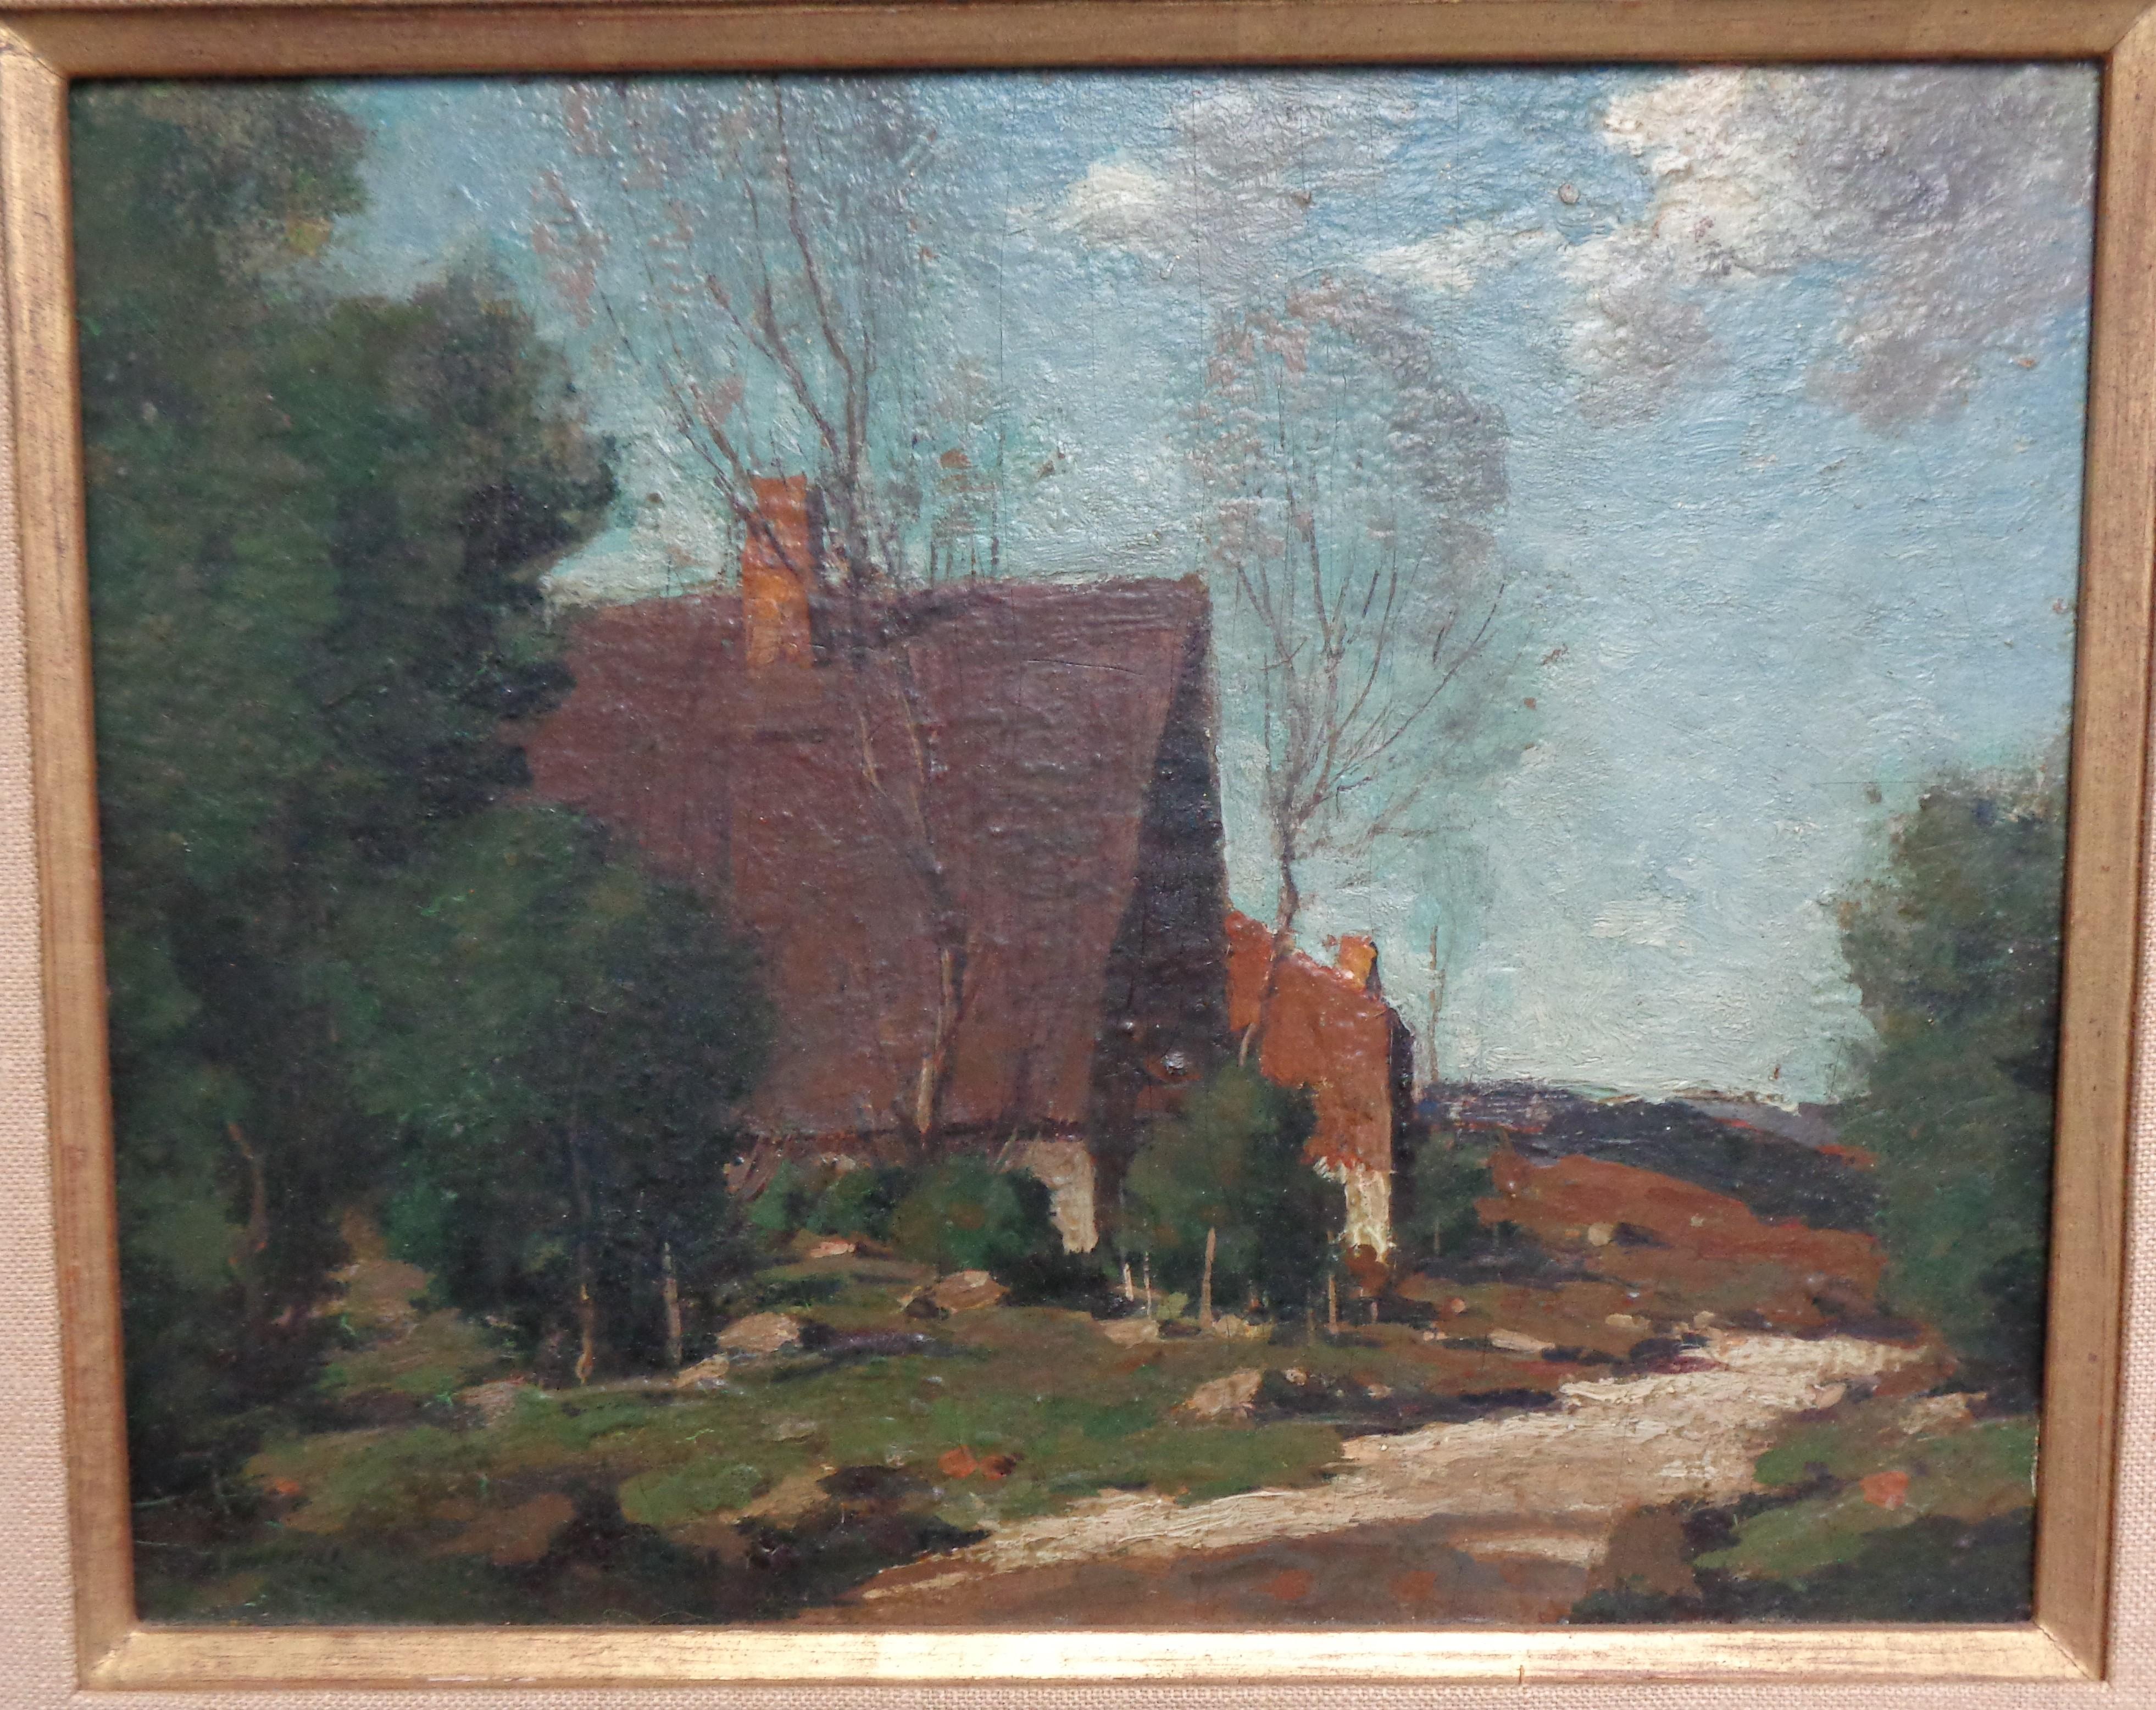 Here is a very beautiful oil painting on panel by American painter George M Bruestle who was a Salmagundi Club artist member. The painting is is good shape ready to hang housed in the original frame. Image measures 8.5 x 10.5 unframed.  The painting